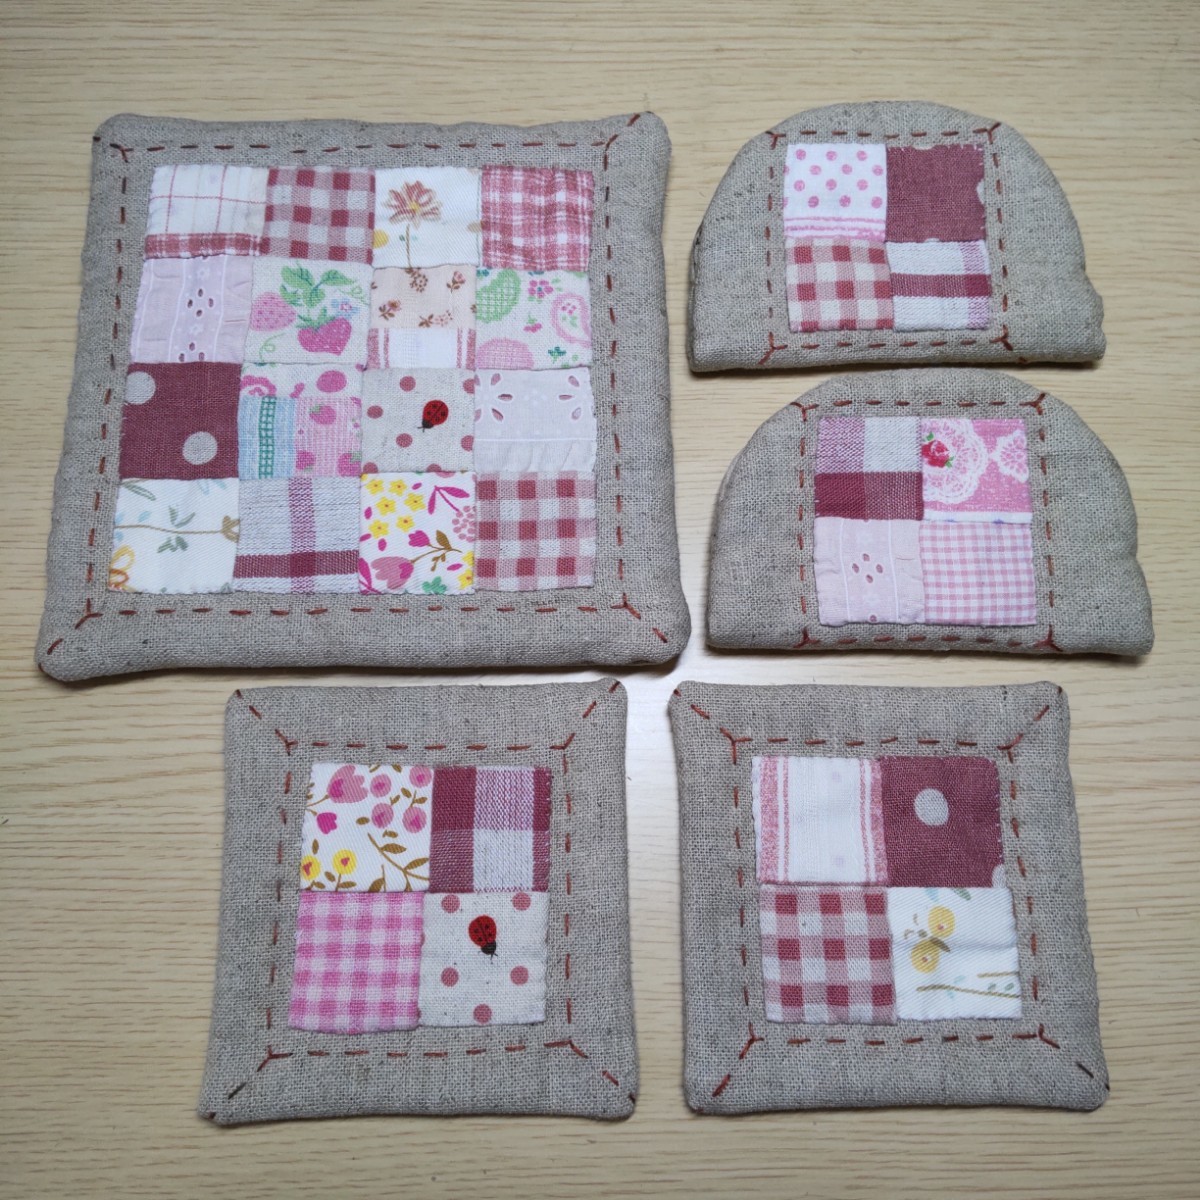  Coaster, potholder, dishmat hand made patchwork quilt interior small articles kitchen 